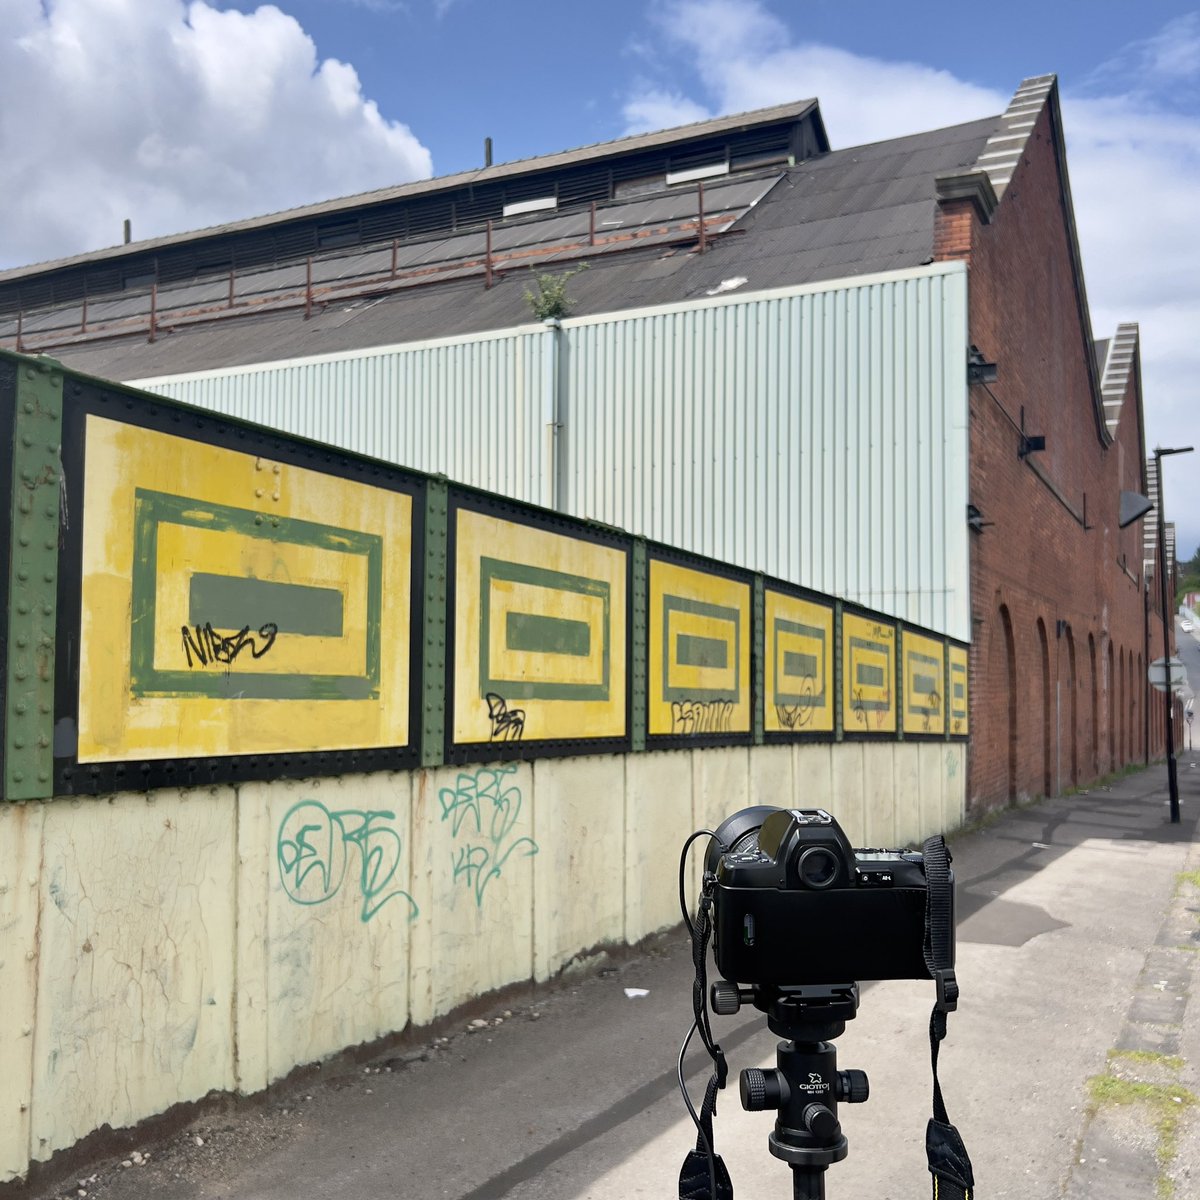 I’ve not been up to the last couple of challenges but today I’m out and about on @steelcitysnaps patch with an old favourite, the Nikon F-801s! #CameraChallenge #believeinfilm